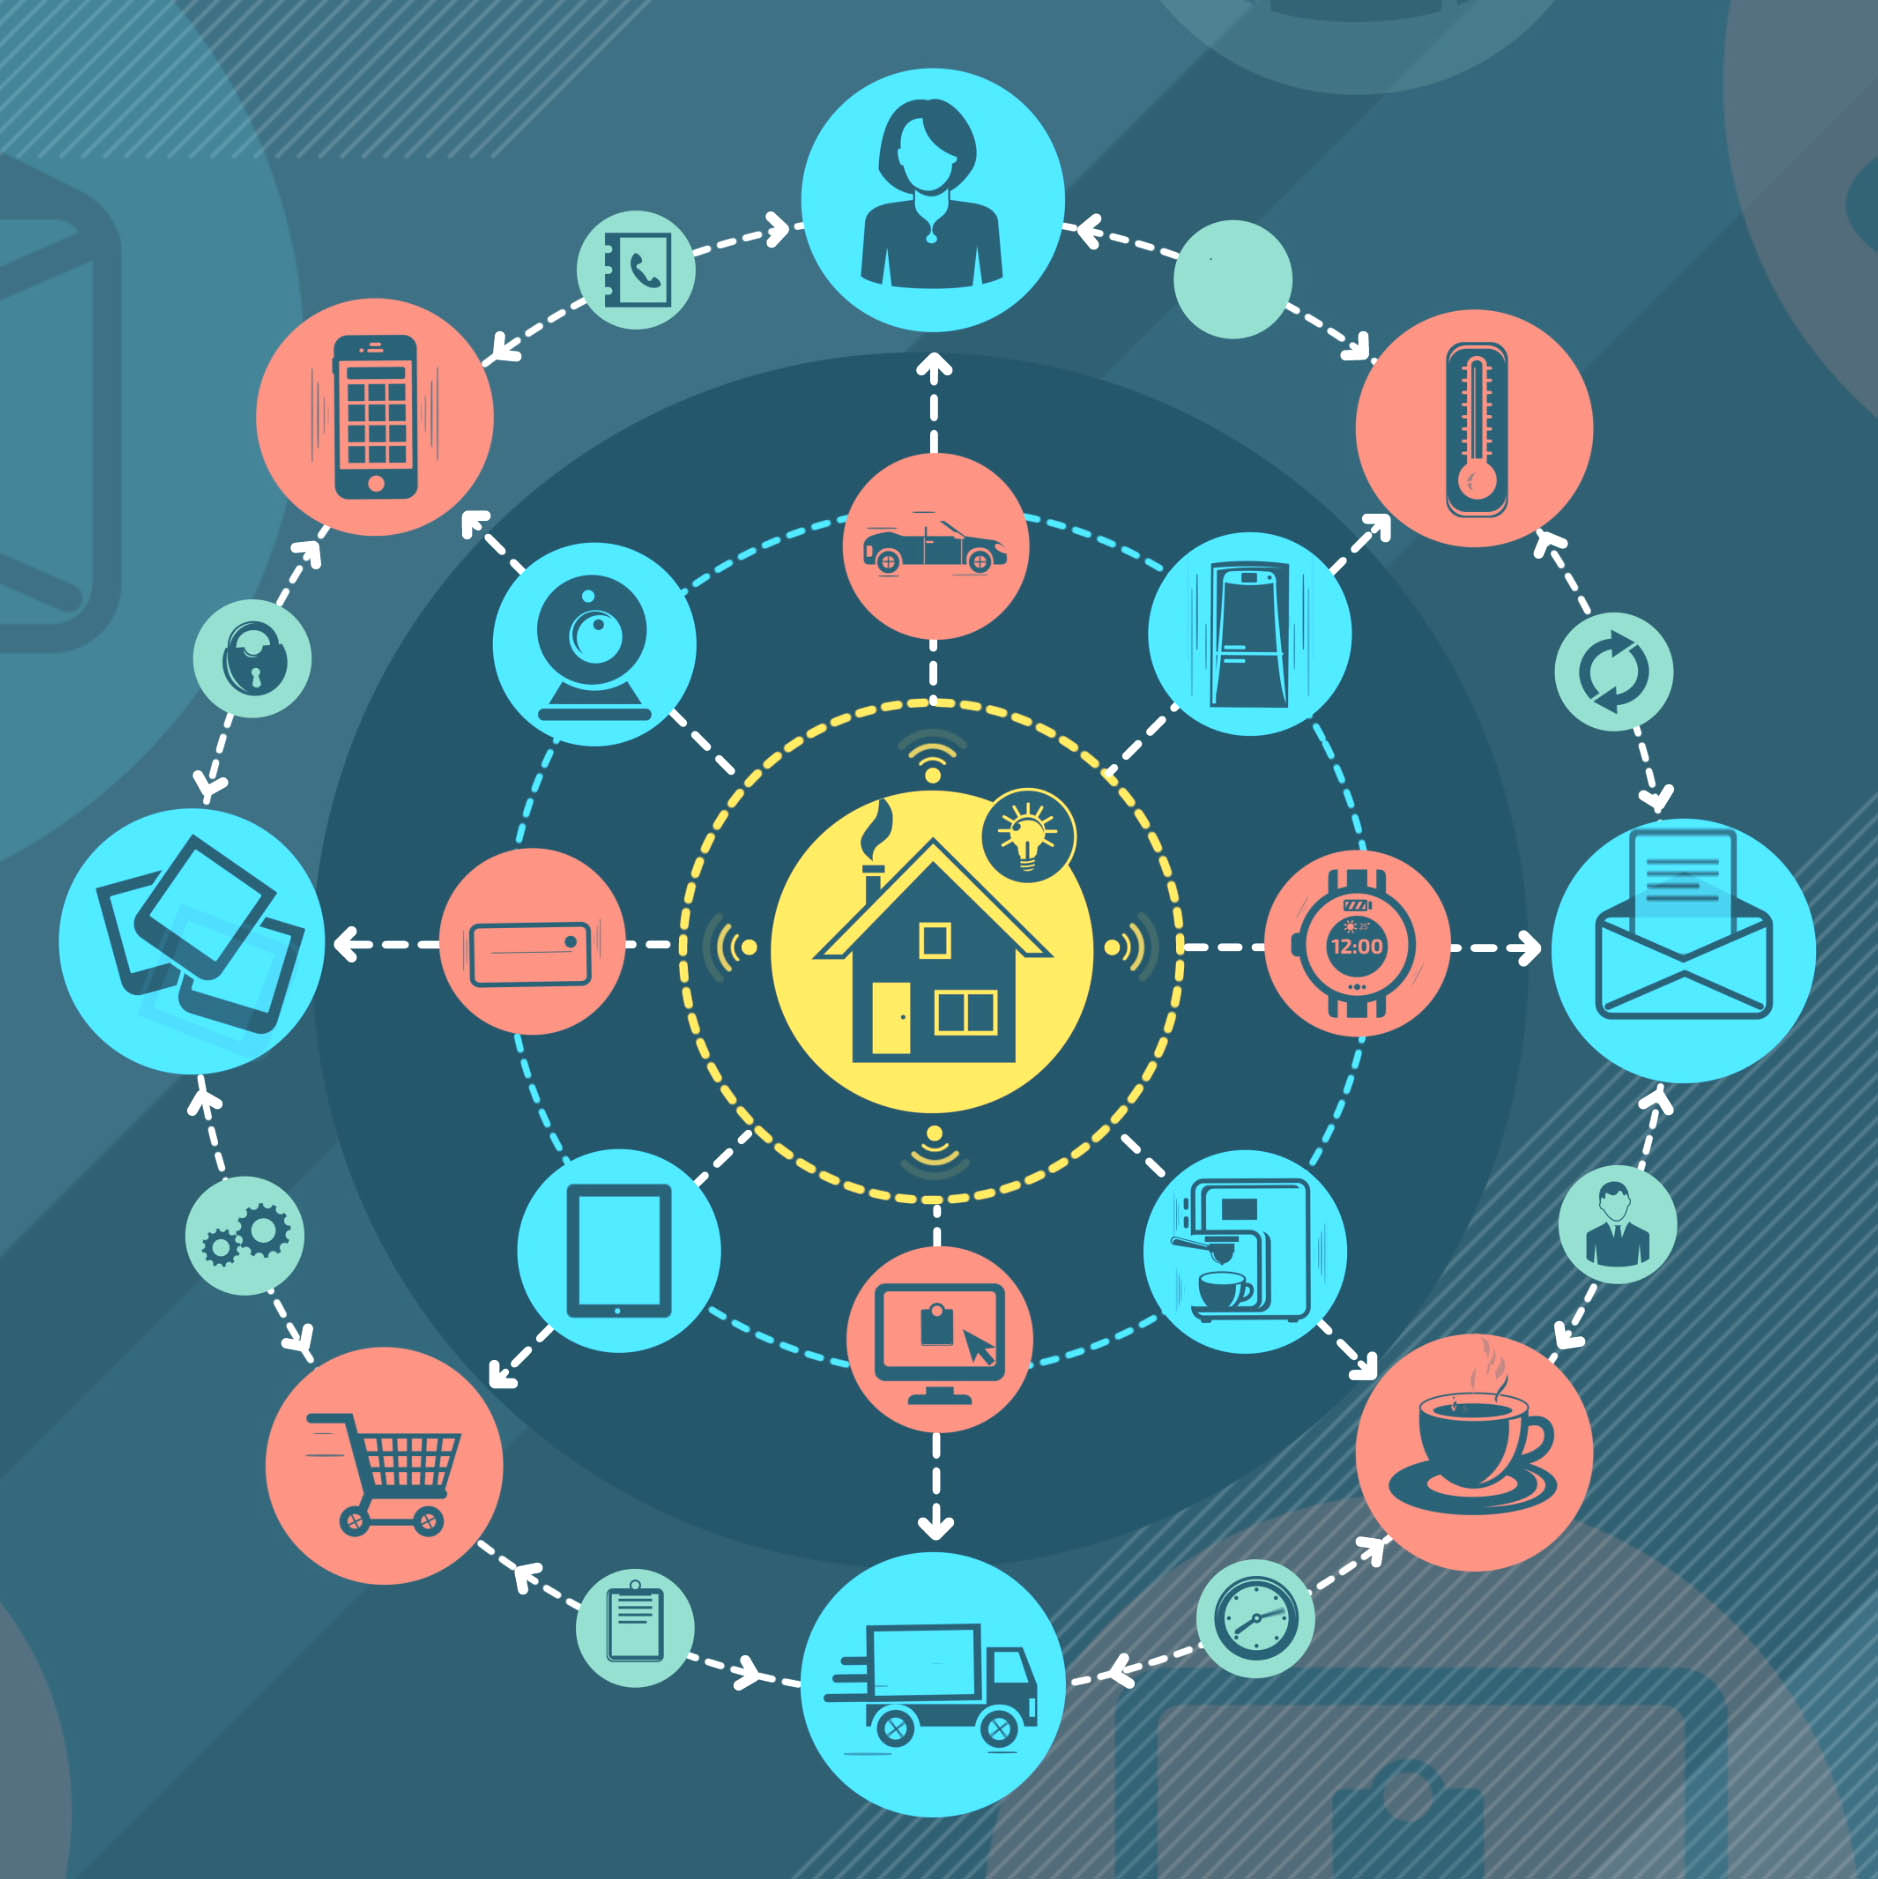 Internet Of Things And Smart Home Infographics